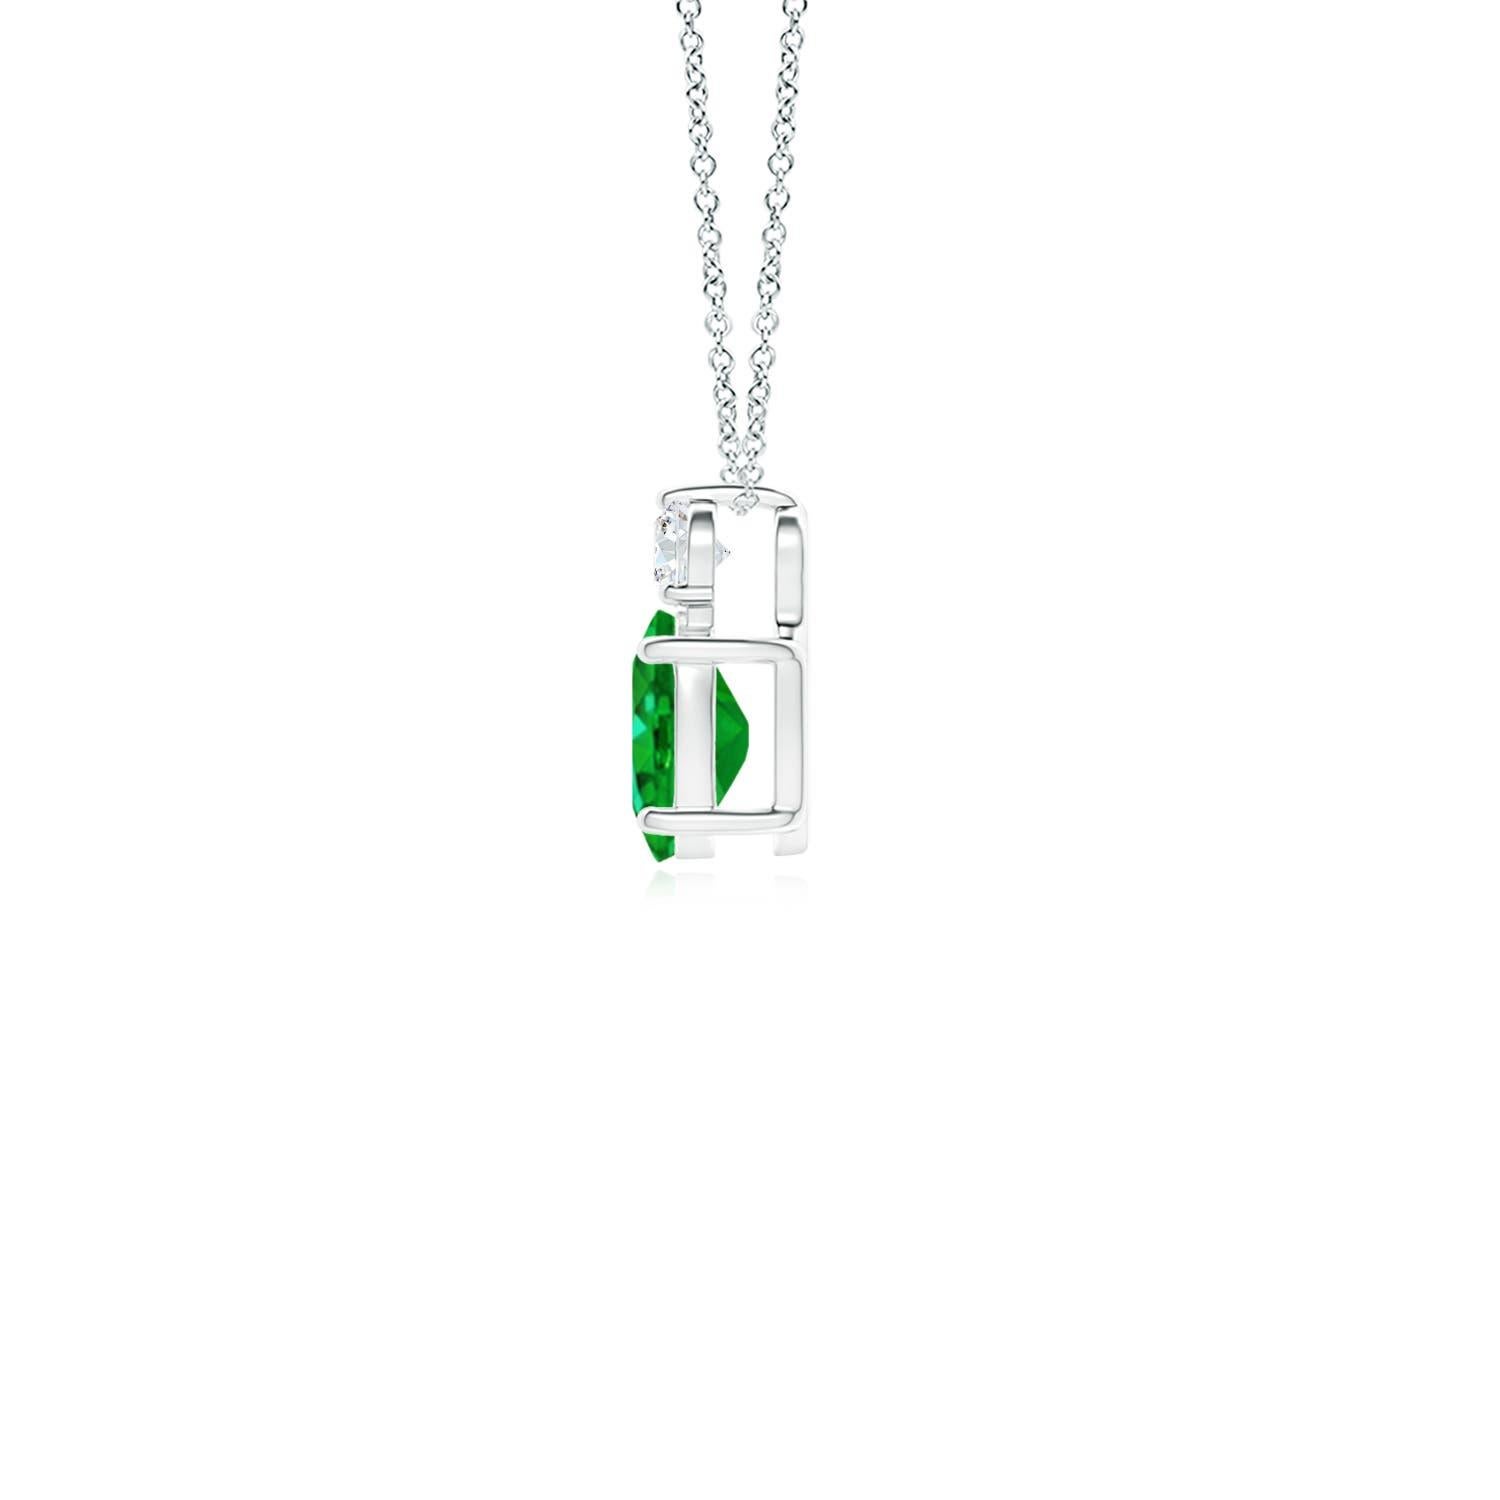 Crafted in Platinum, this classic solitaire emerald pendant personifies elegance. The rich green oval emerald is topped by a sparkling diamond for added allure. The intricate scroll work on the sides enhances this prong set emerald pendant's